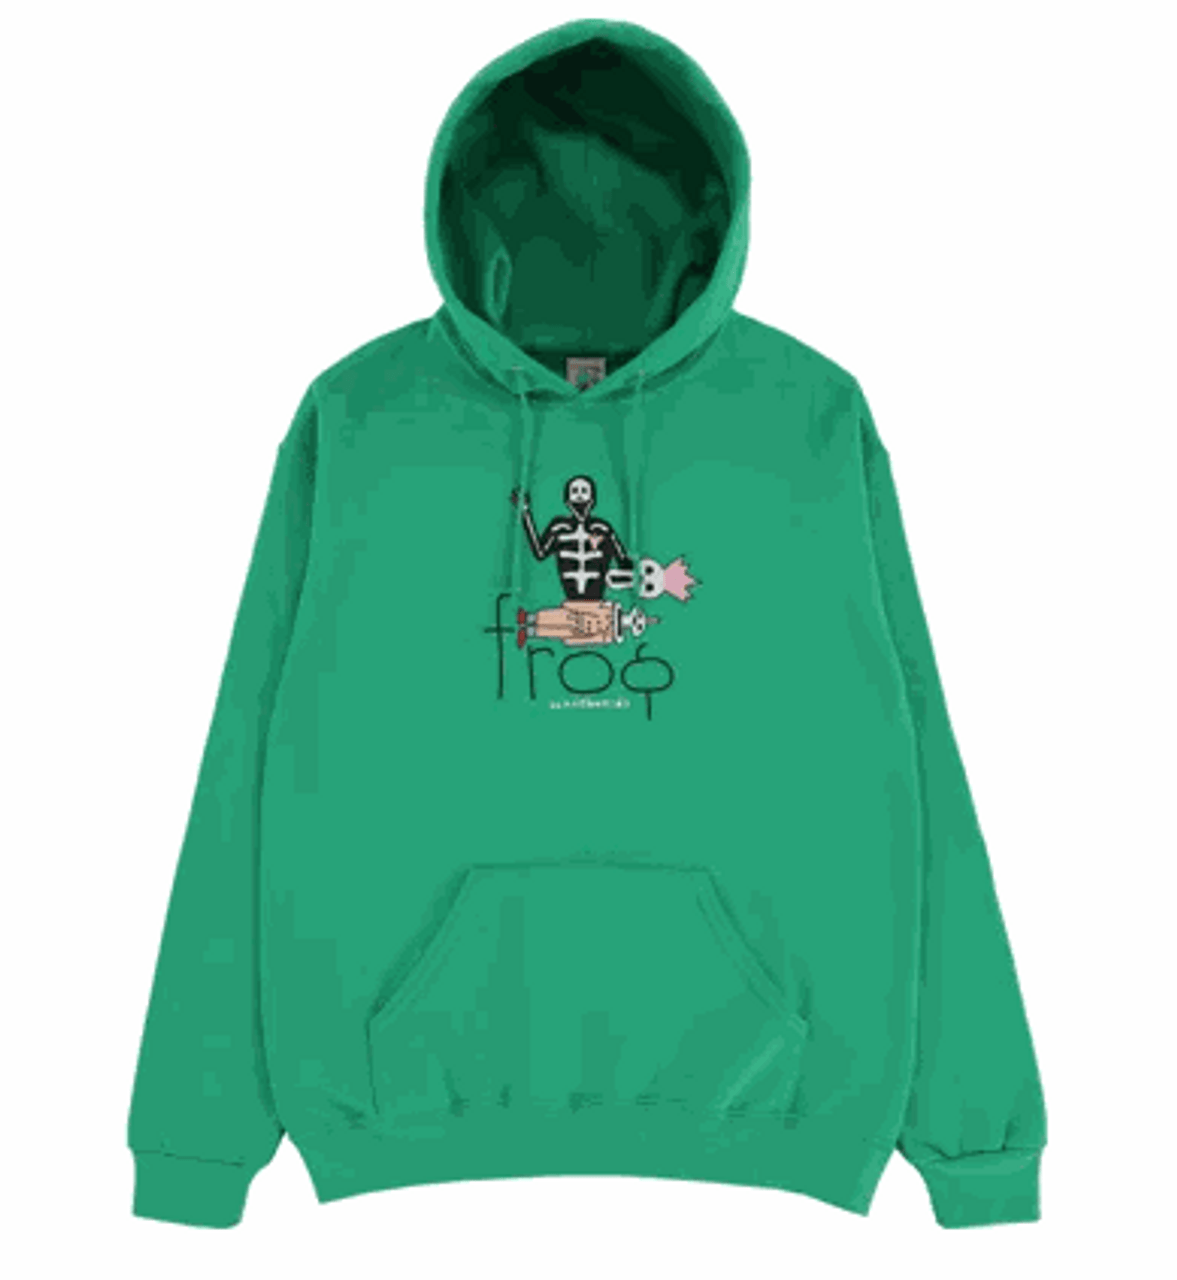 Frog After Life (Kelly Green) Hoodie XL